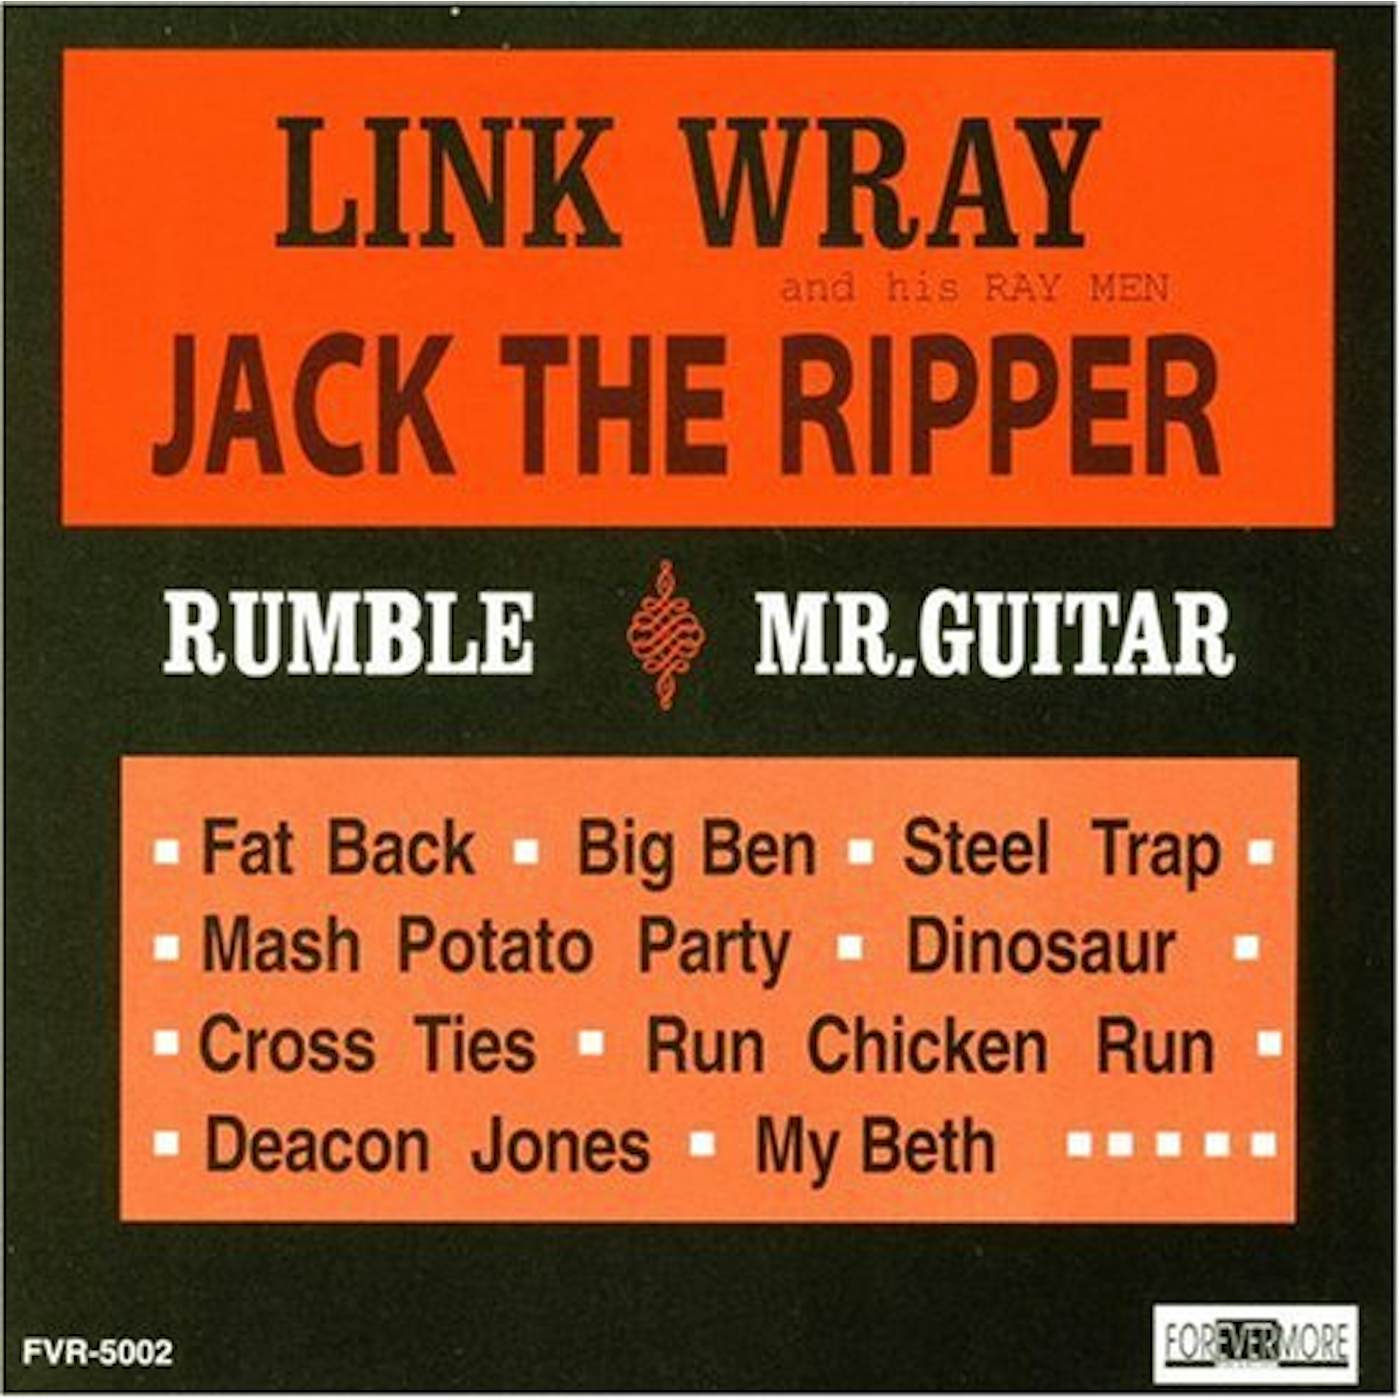 Link Wray JACK THE RIPPER CD